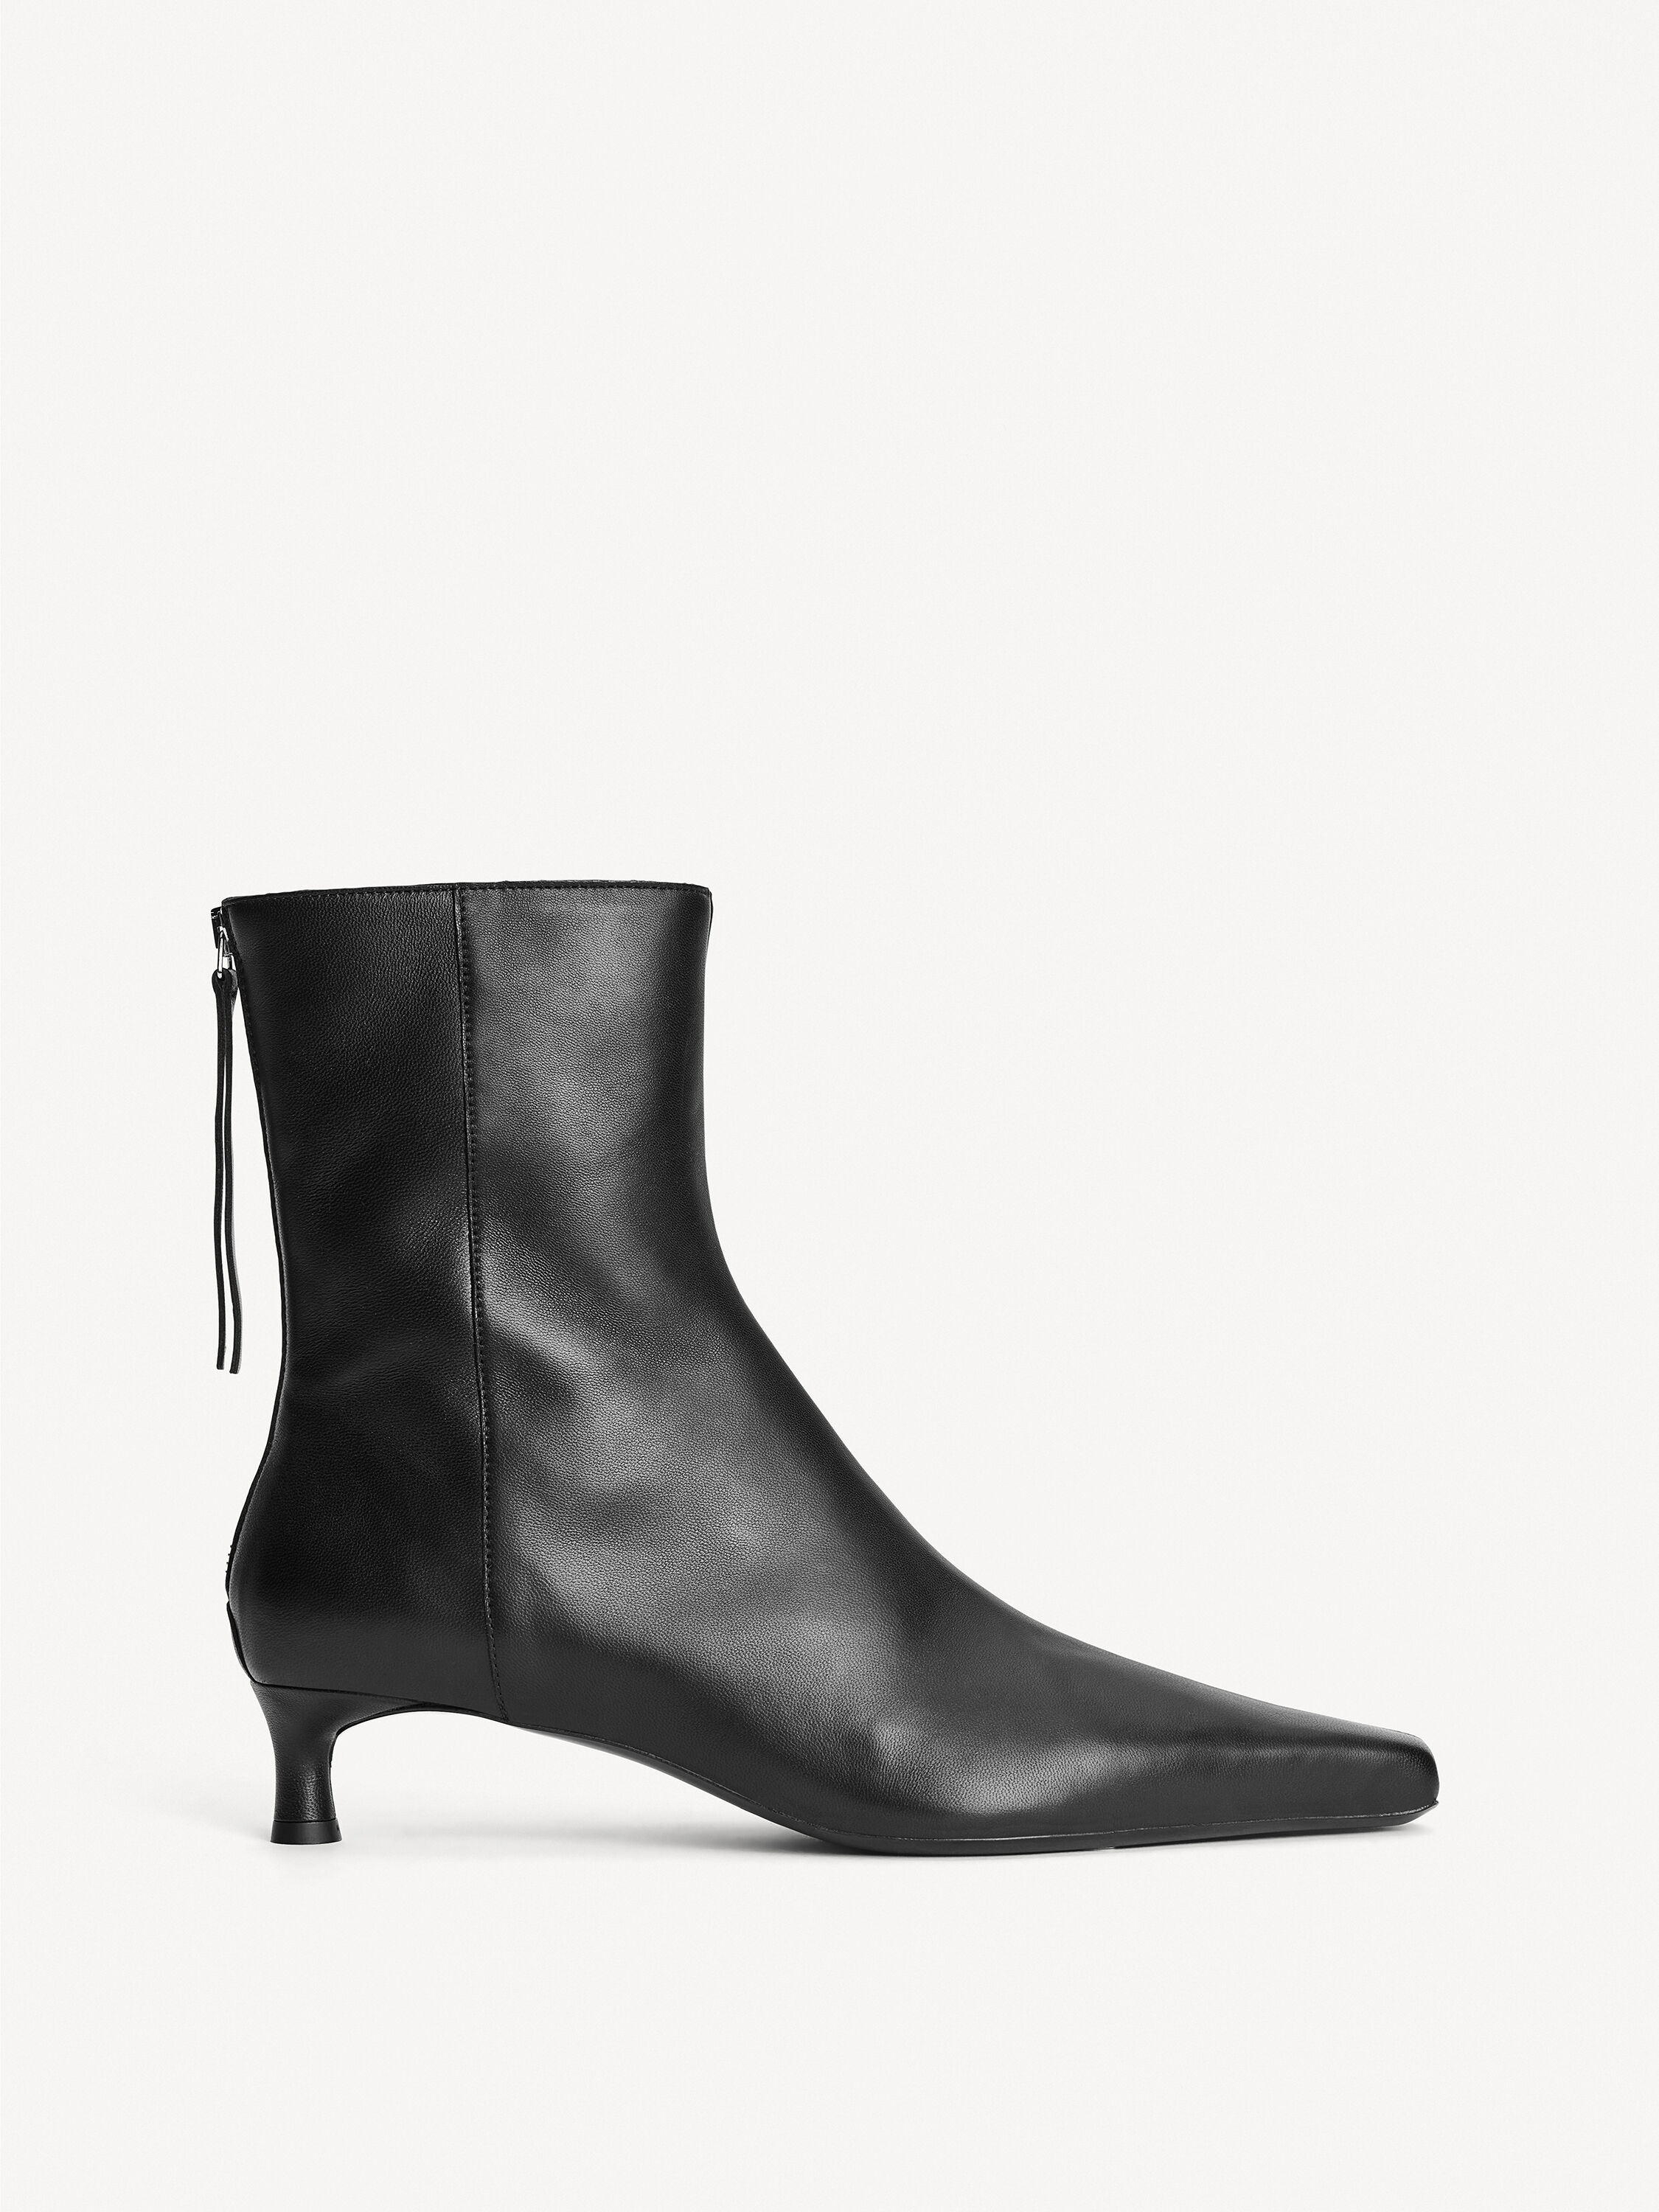 Shoes | See all styles here | By Malene Birger